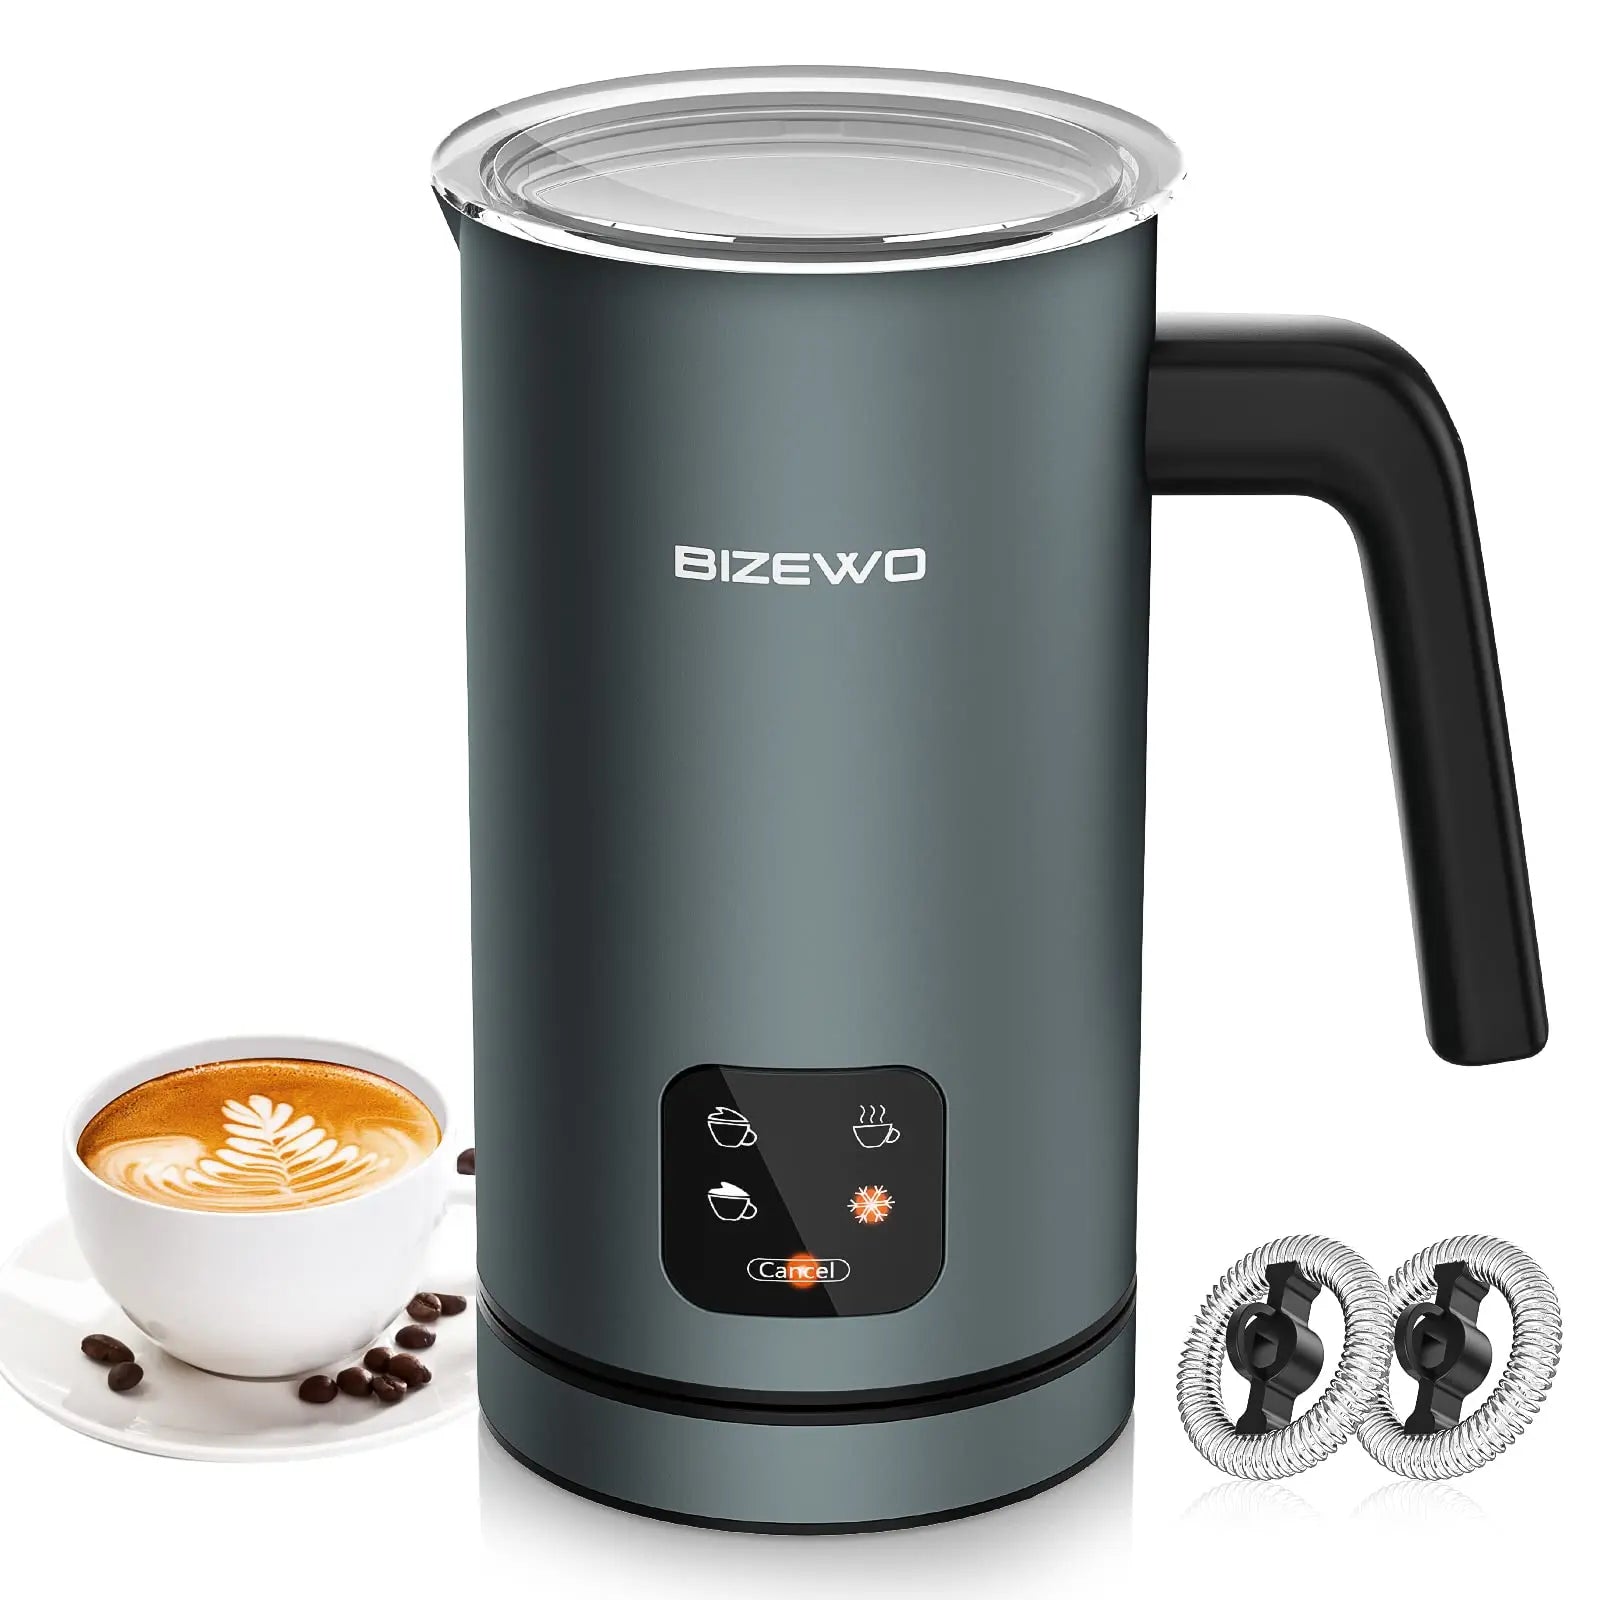 http://bizewohome.com/cdn/shop/files/Frother-for-Coffee_-Milk-Frother_-4-IN-1-Automatic-Warm-and-Cold-Milk-Foamer_-BIZEWO-Stainless-Steel-Milk-Steamer-for-Latte_-Cappuccinos_-Macchiato_-Hot-Chocolate-Milk-with-LED-Touch.jpg?v=1690162785